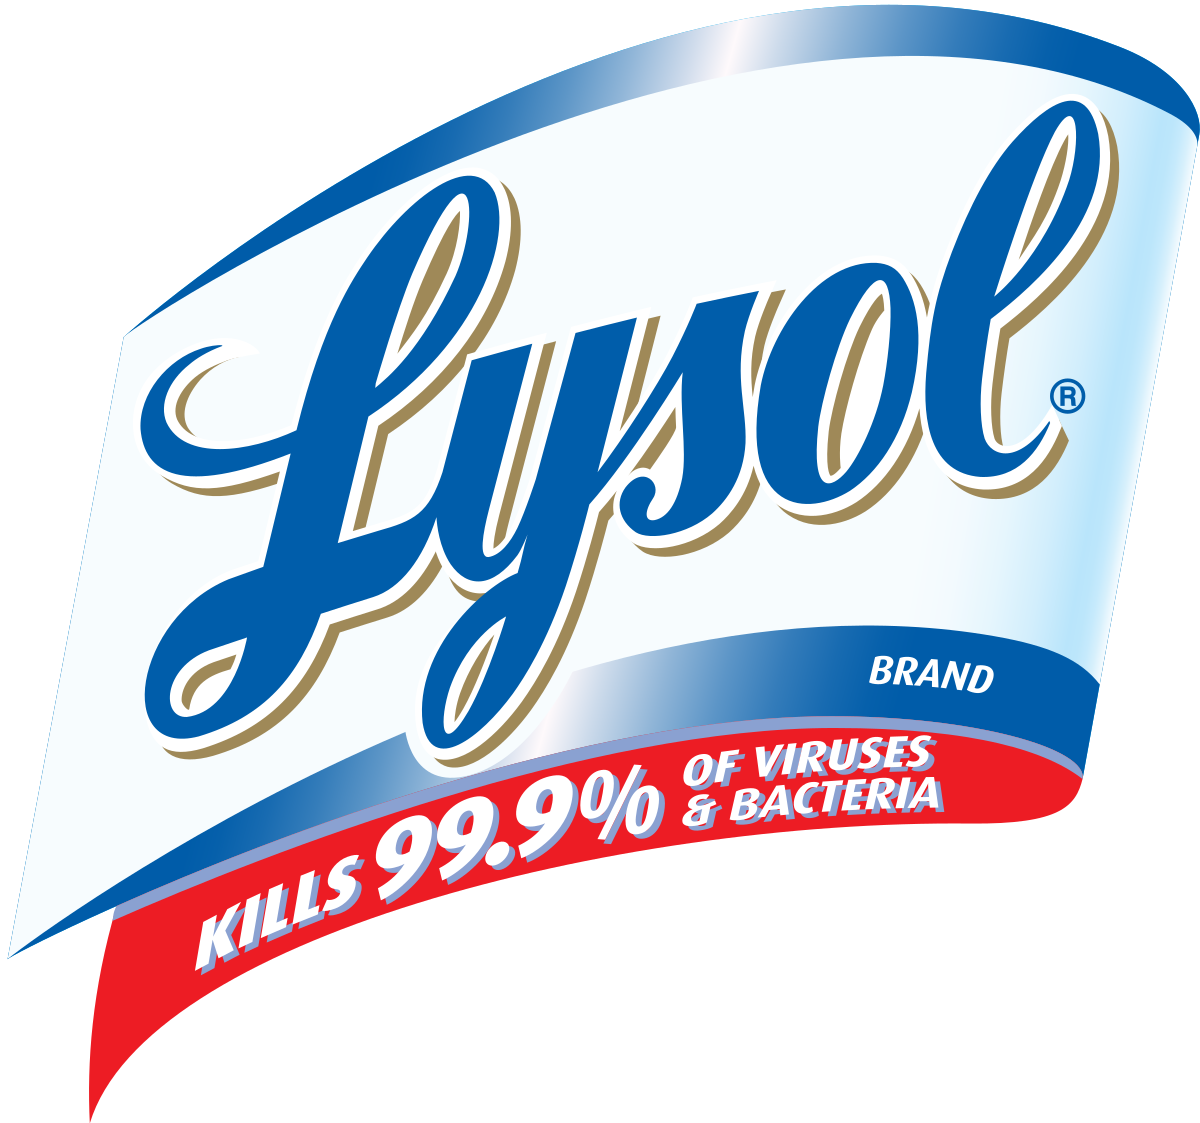 Lysol Simply Multi-purpose Cleaner Spray 22oz, Orange Blossom, No Harsh Chemicals, Plant-based Ingredient, Kills 99% of Bacteria